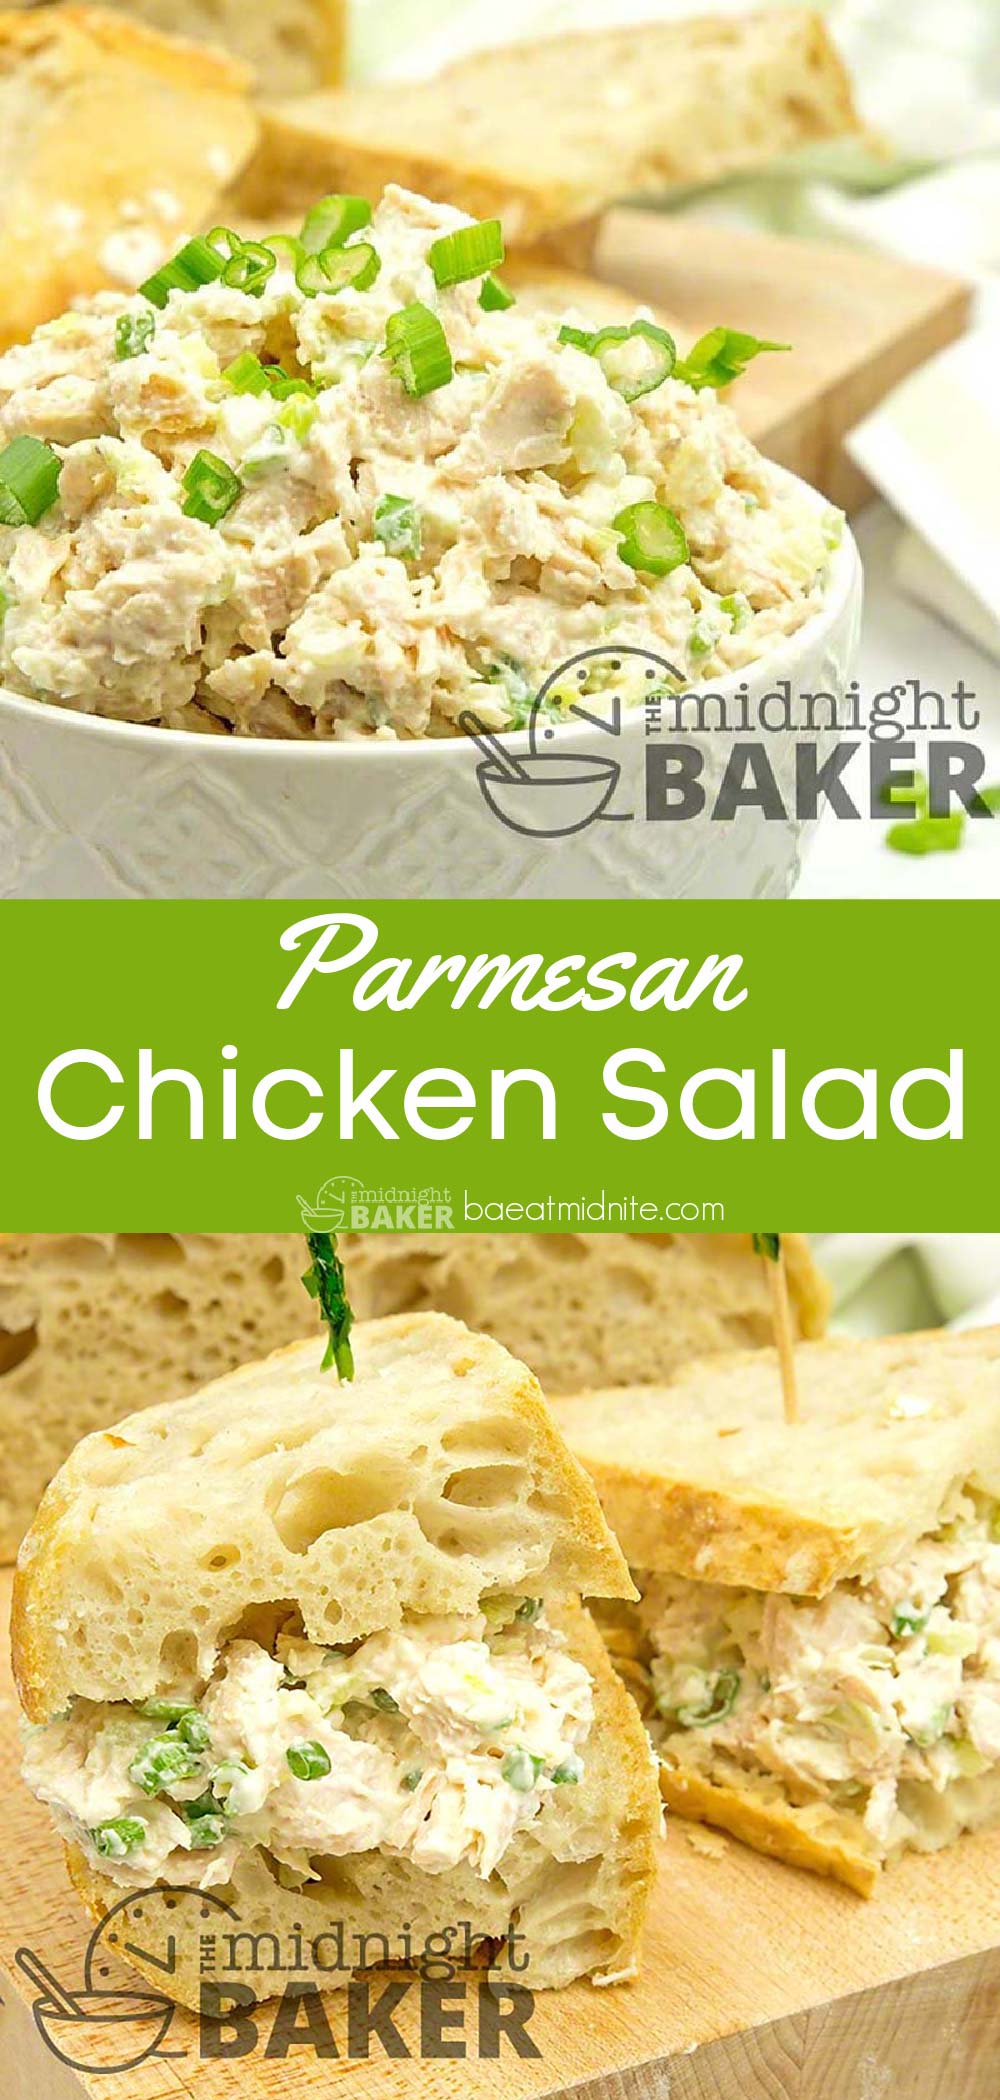 Parmesan chicken salad is a great way to use that leftover chicken.